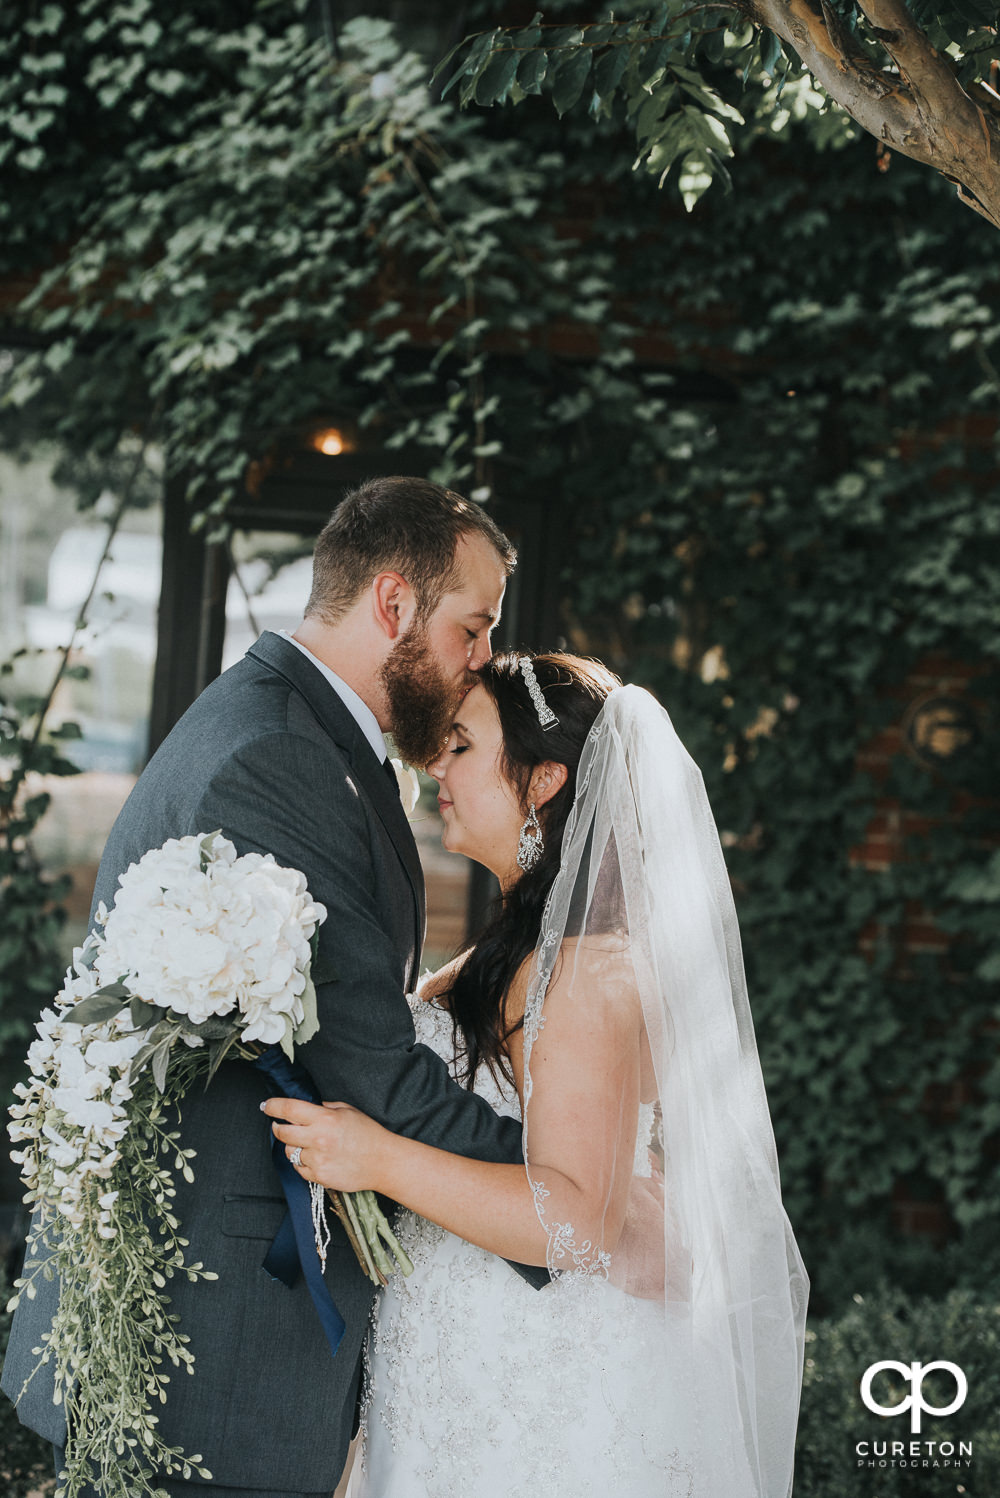 Groom kissing his bride on the forehead in front of a wall of ivy at The Loom after their wedding.